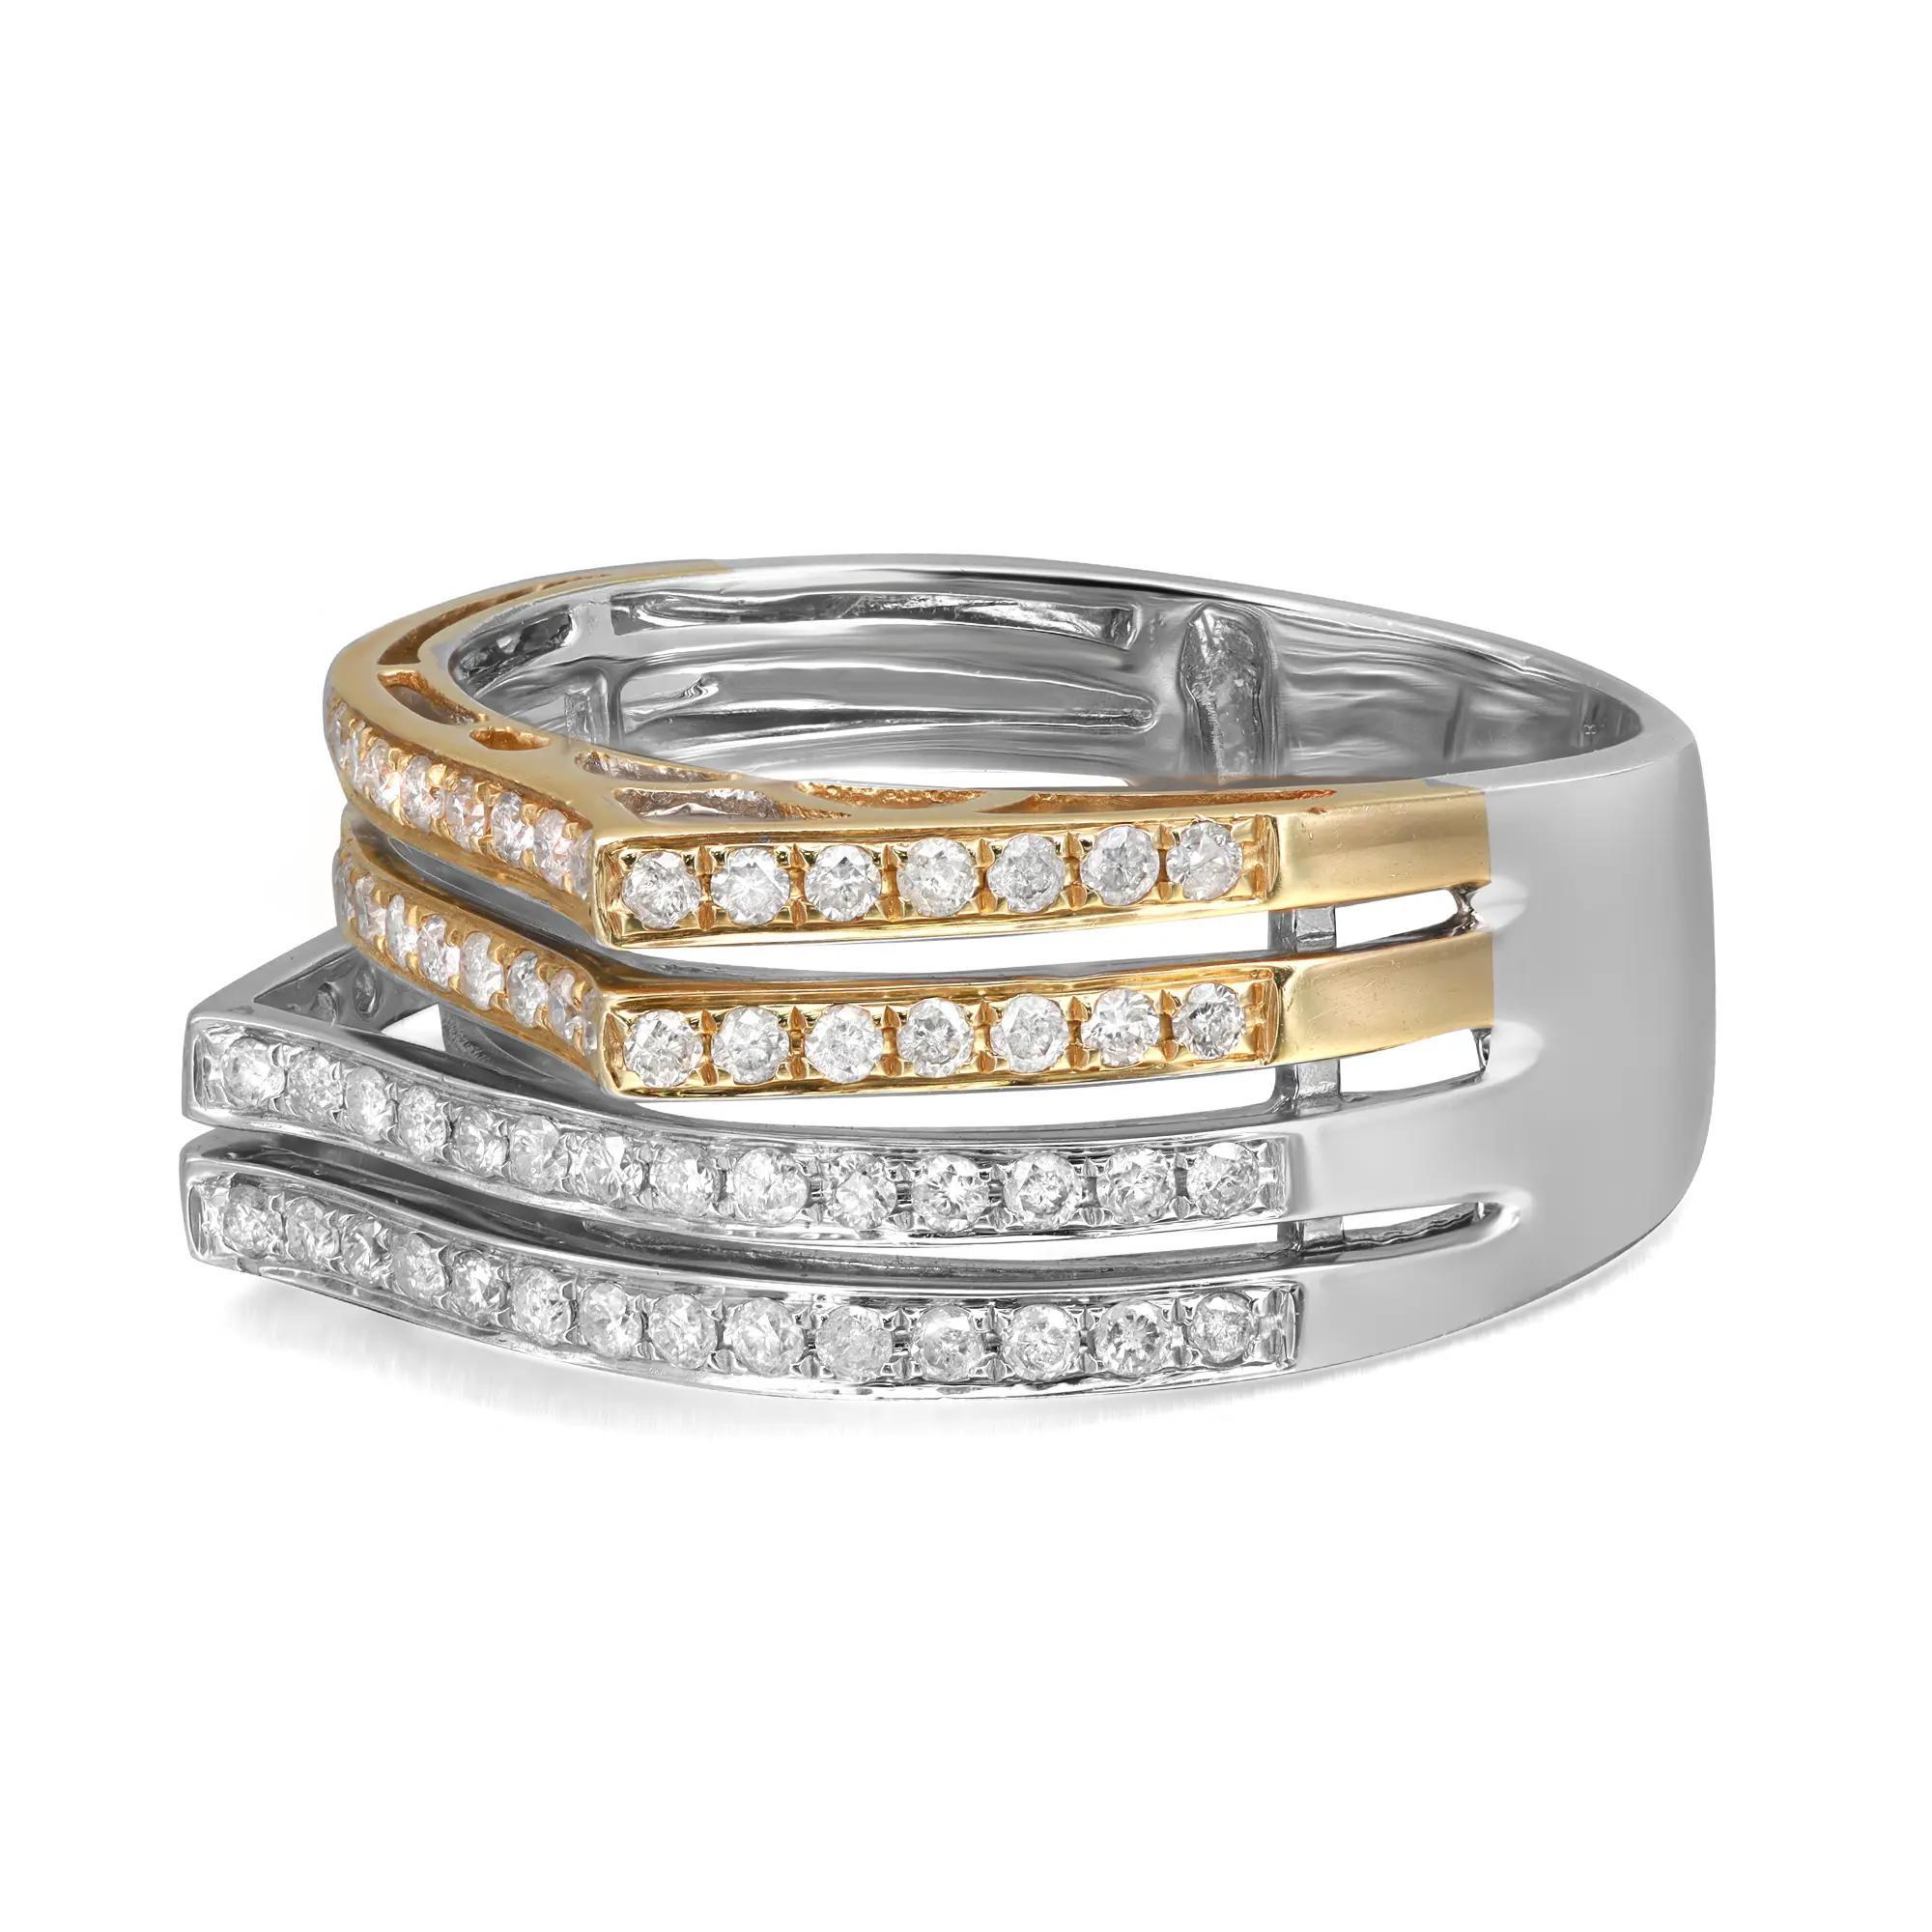 This elegant and classic diamond band ring is crafted in 14k white and yellow gold. Features four rows of pave set round brilliant cut diamonds weighing 0.58 carat. Ring width: 9.4mm. Ring size: 7.5. Total weight: 6.00 grams. Perfect addition to